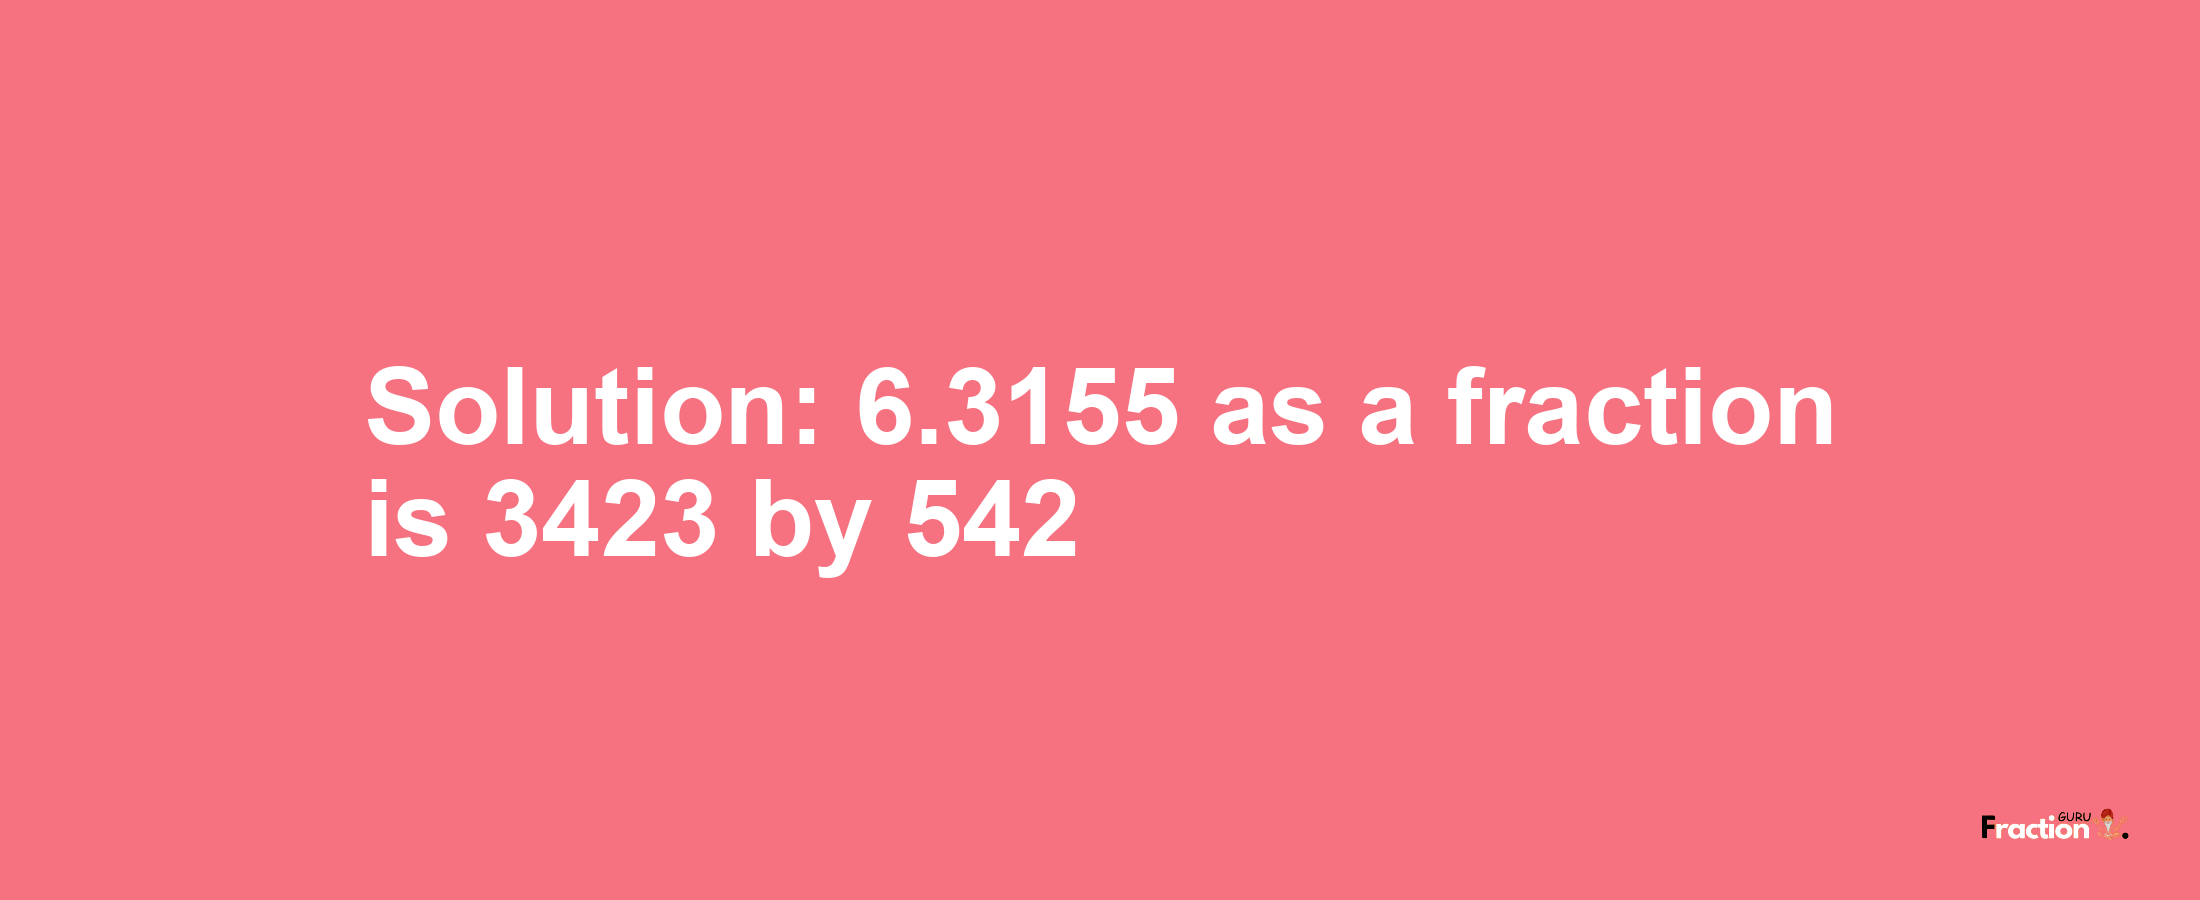 Solution:6.3155 as a fraction is 3423/542